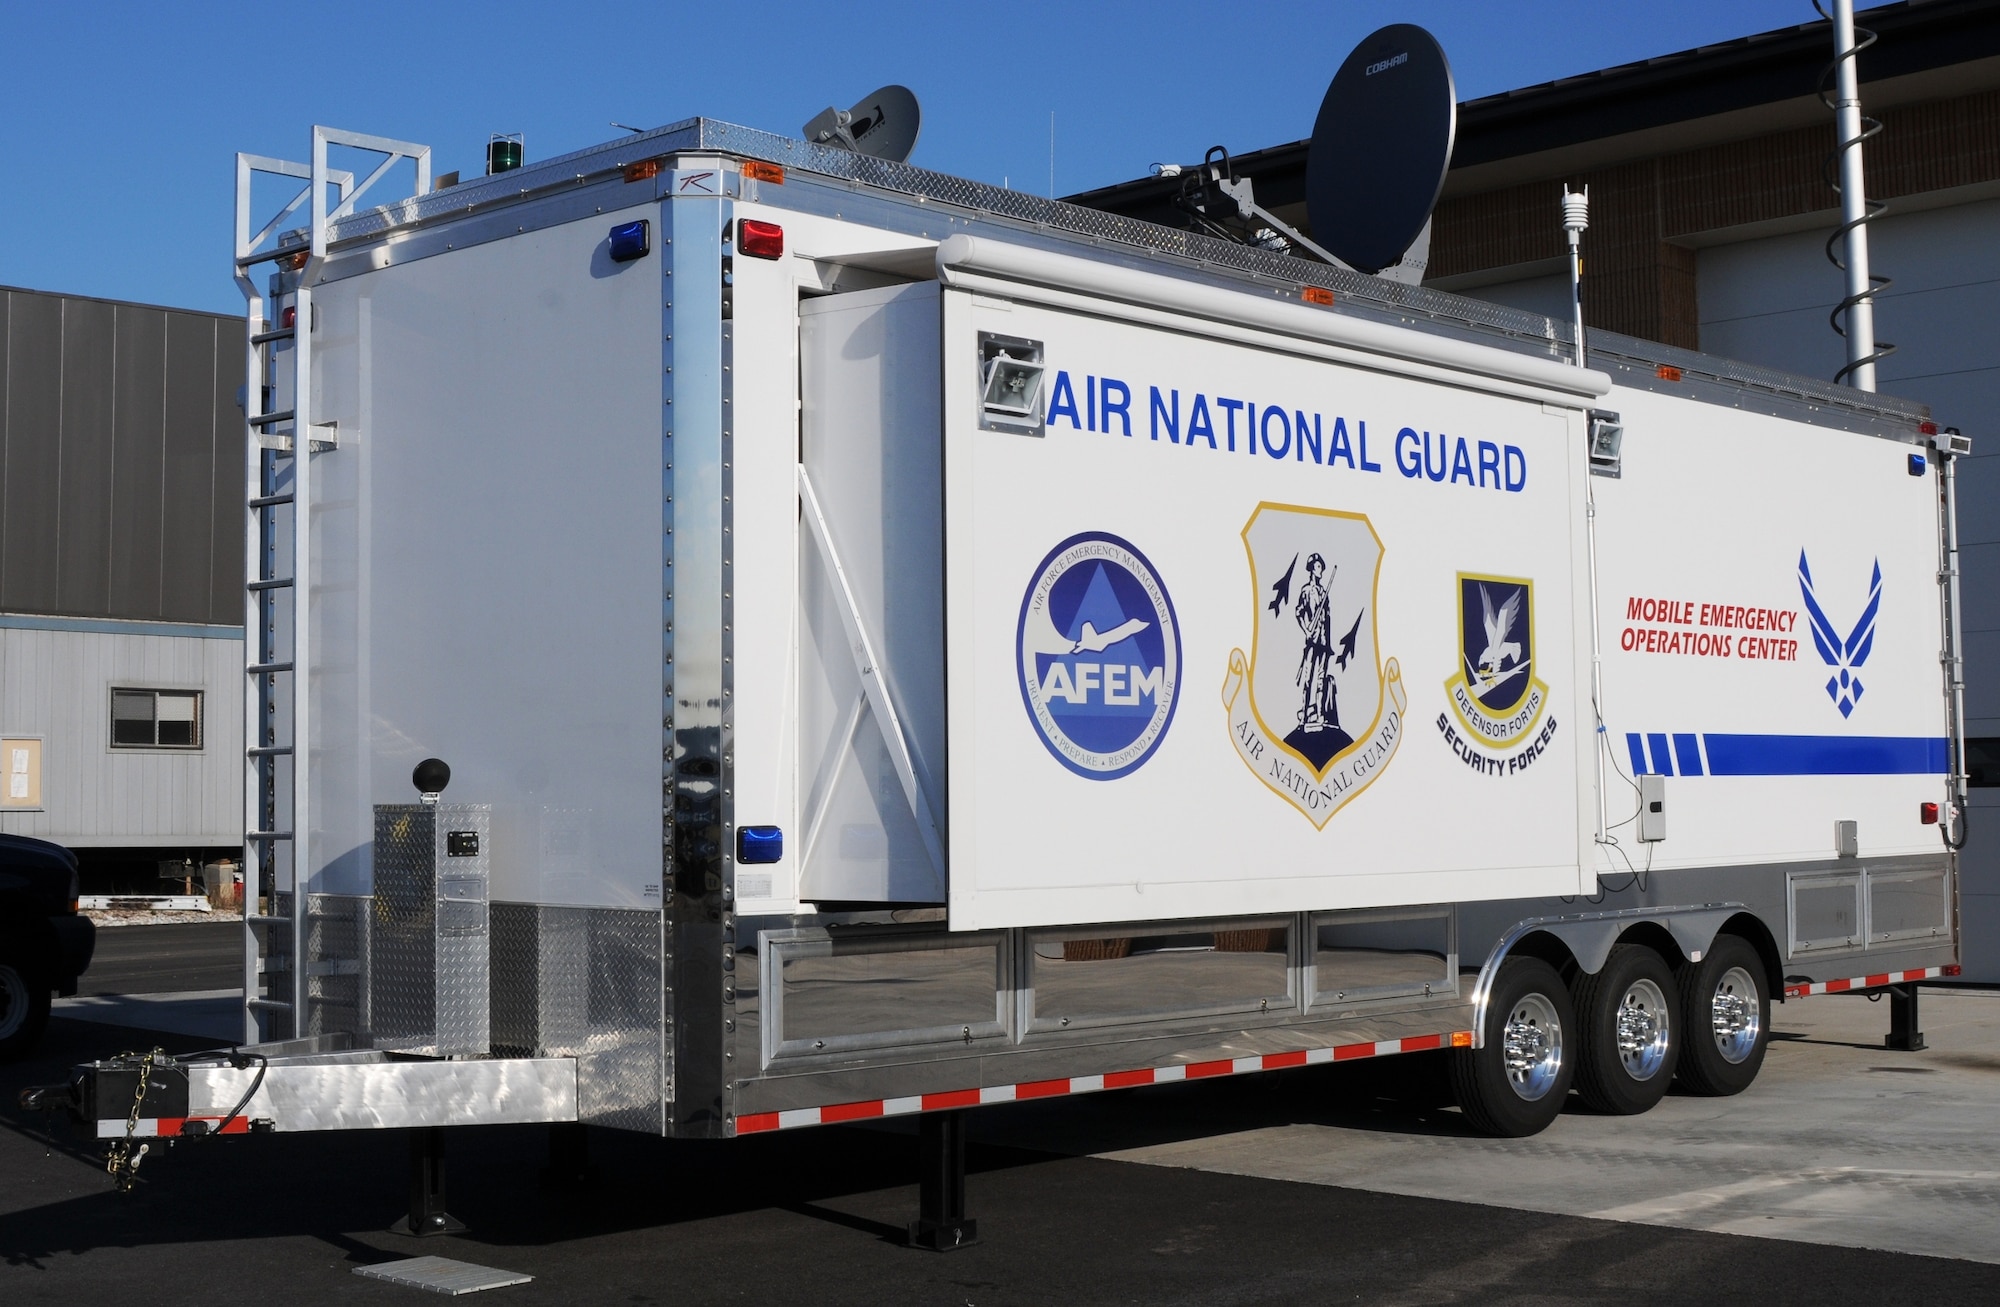 The Maryland Air National Guard recently acquired a Mobile Emergency Operations Center which is designed to support civilian entities in a disaster in Maryland, Virginia, West Virginia, Pennsylvania and Delaware. The trailer is stored at the fire station at Warfield Air National Guard Base in Baltimore, Md. (National Guard photo by Tech. Sgt. David Speicher/RELEASED)